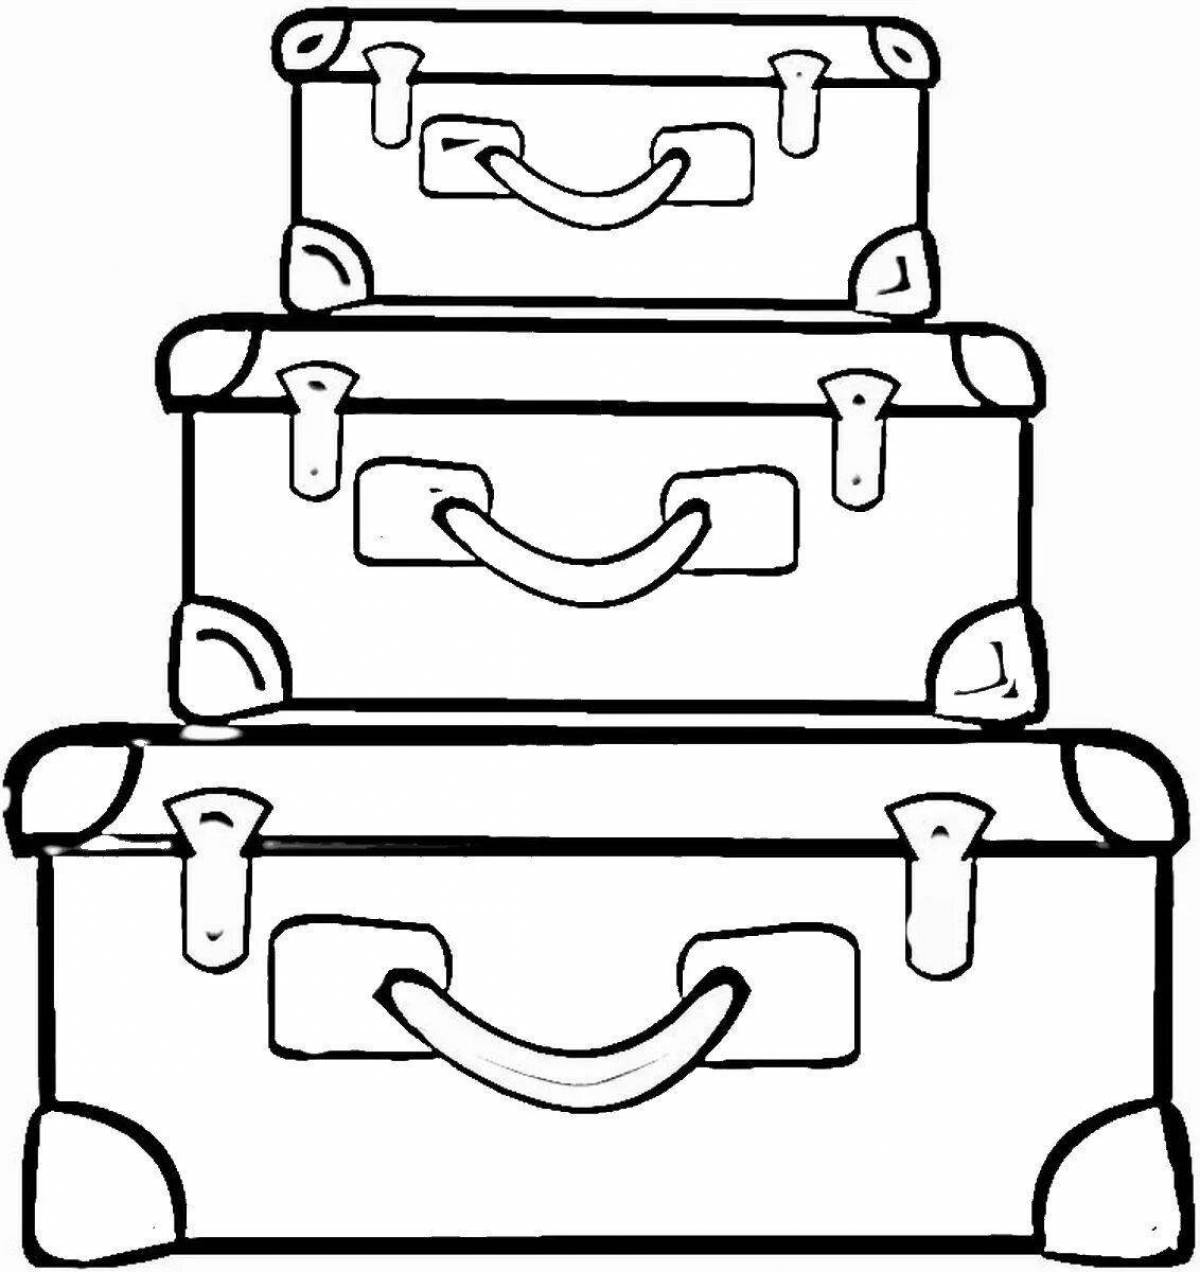 Fun suitcase coloring for the little ones